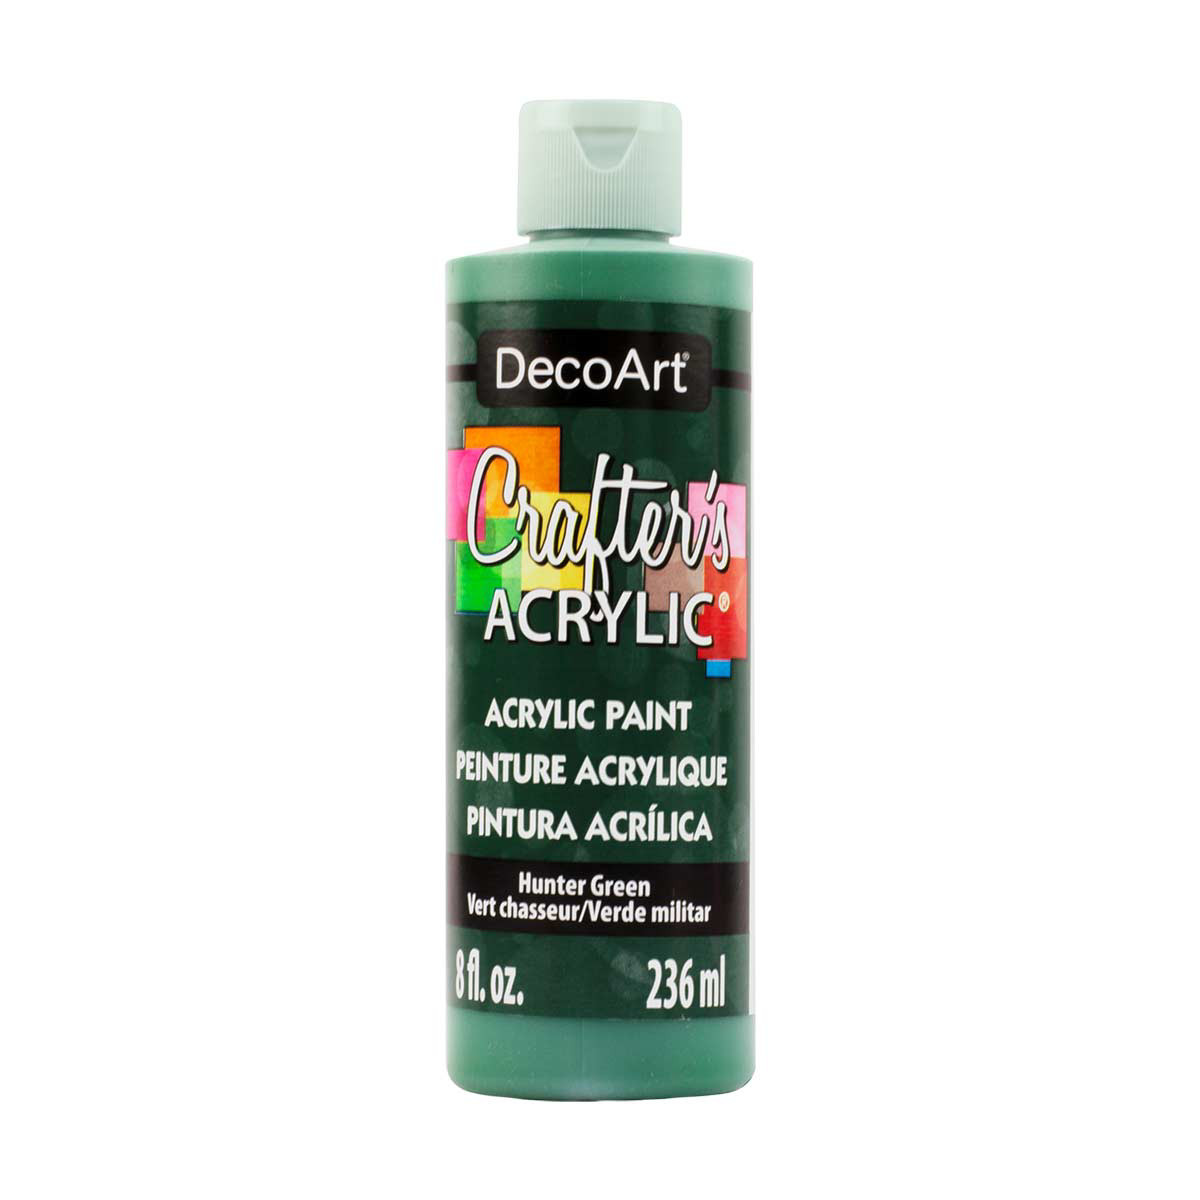 Crafter's Acrylic All Purpose Paint 8oz-Holiday Green